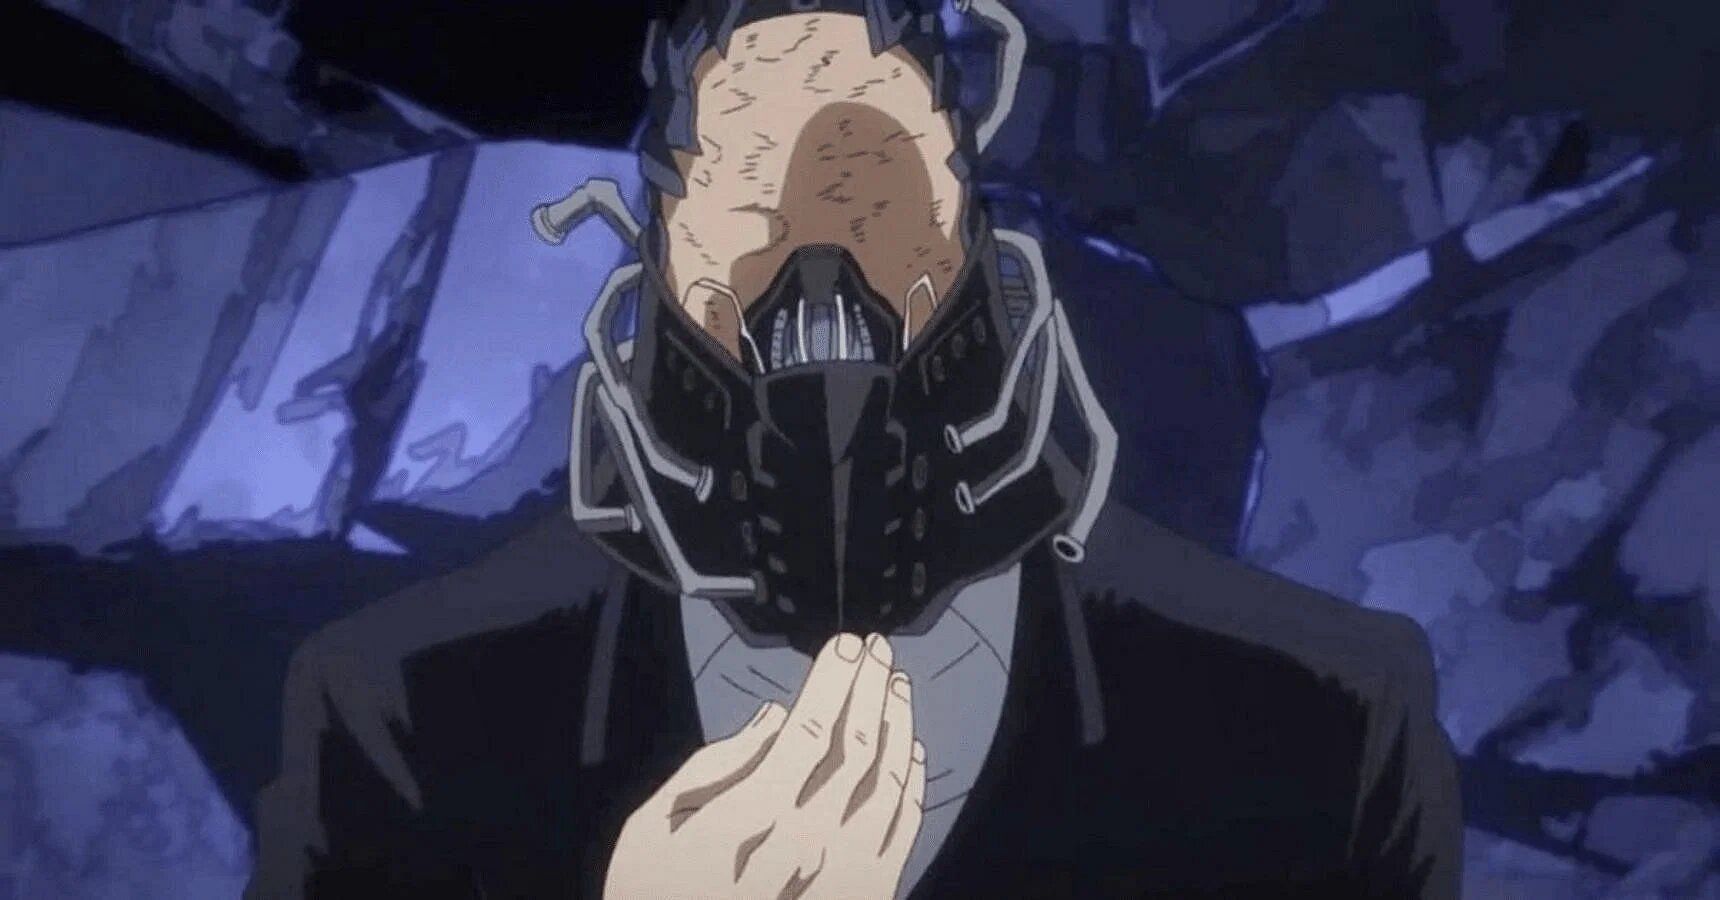 Started well but became one of the most hated anime villains (Image via Bones).